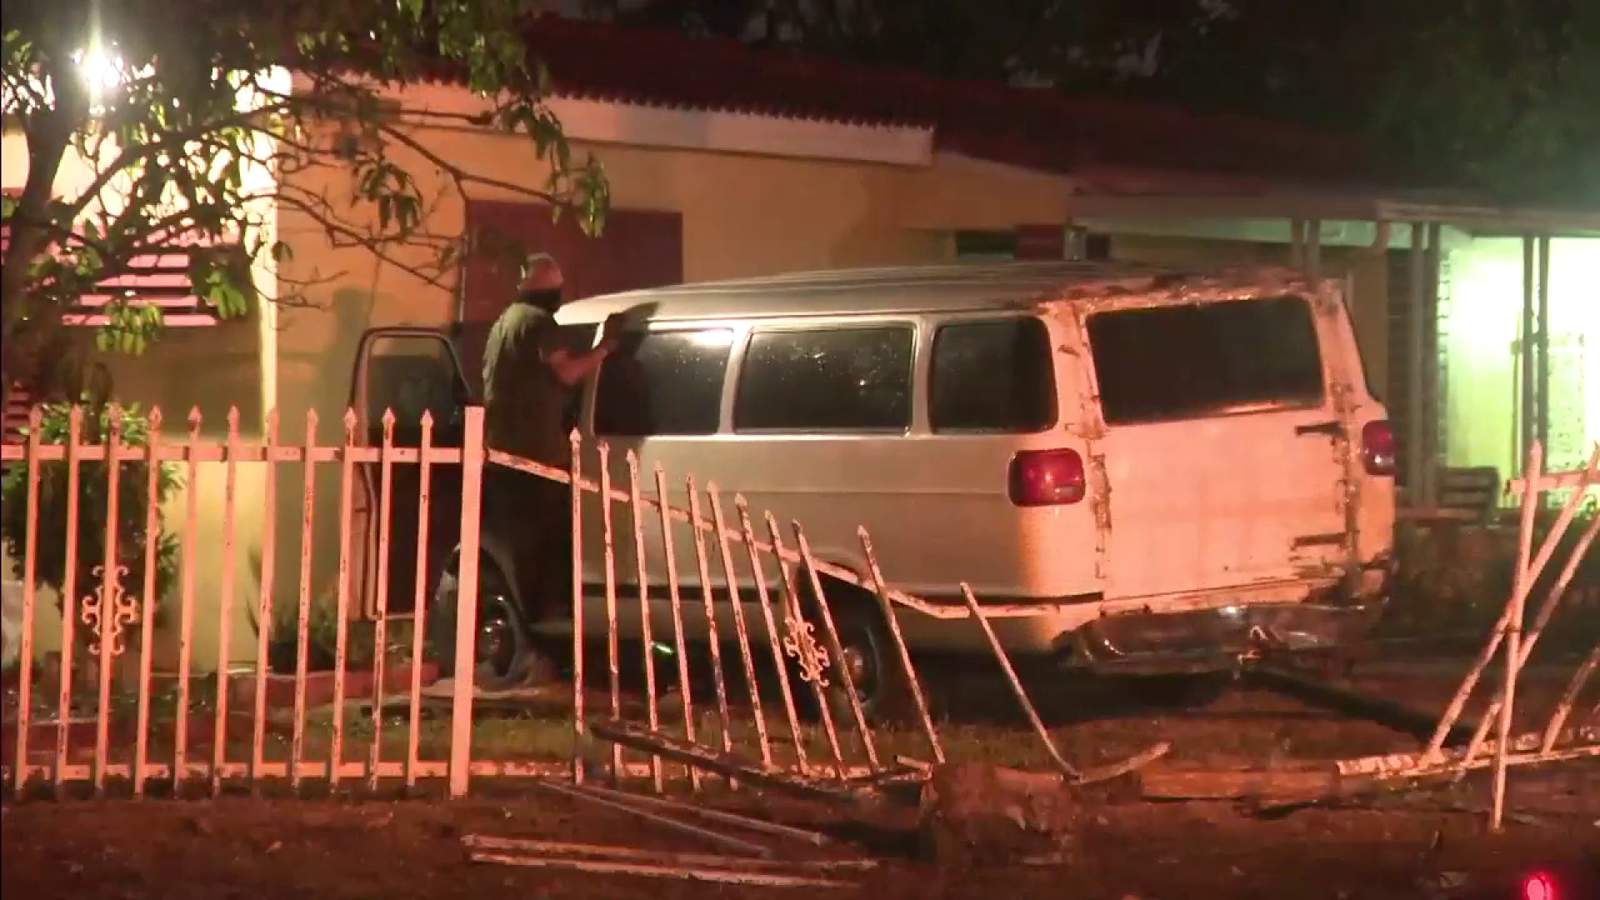 Collision causes van to slam into bedroom wall of house in NW Miami-Dade